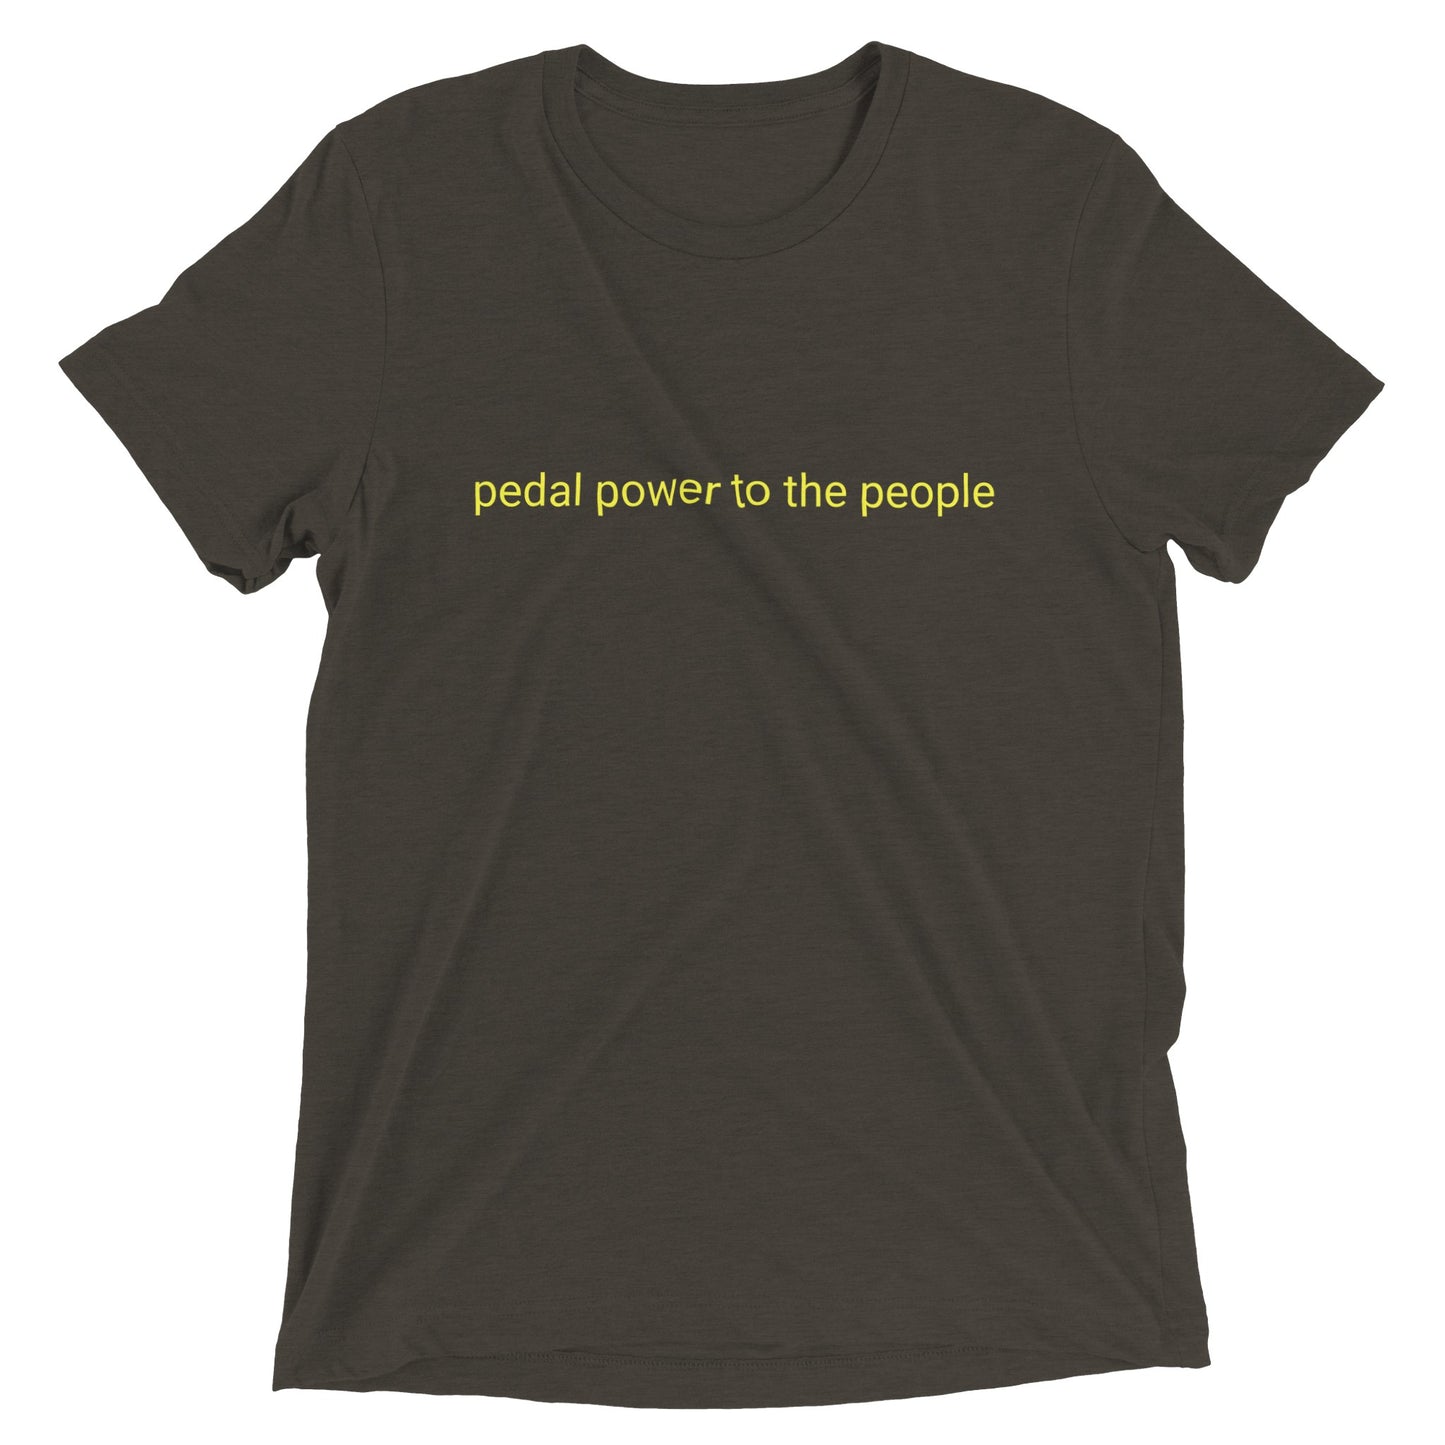 Pedal power to the people - Triblend Unisex Crewneck T-shirt